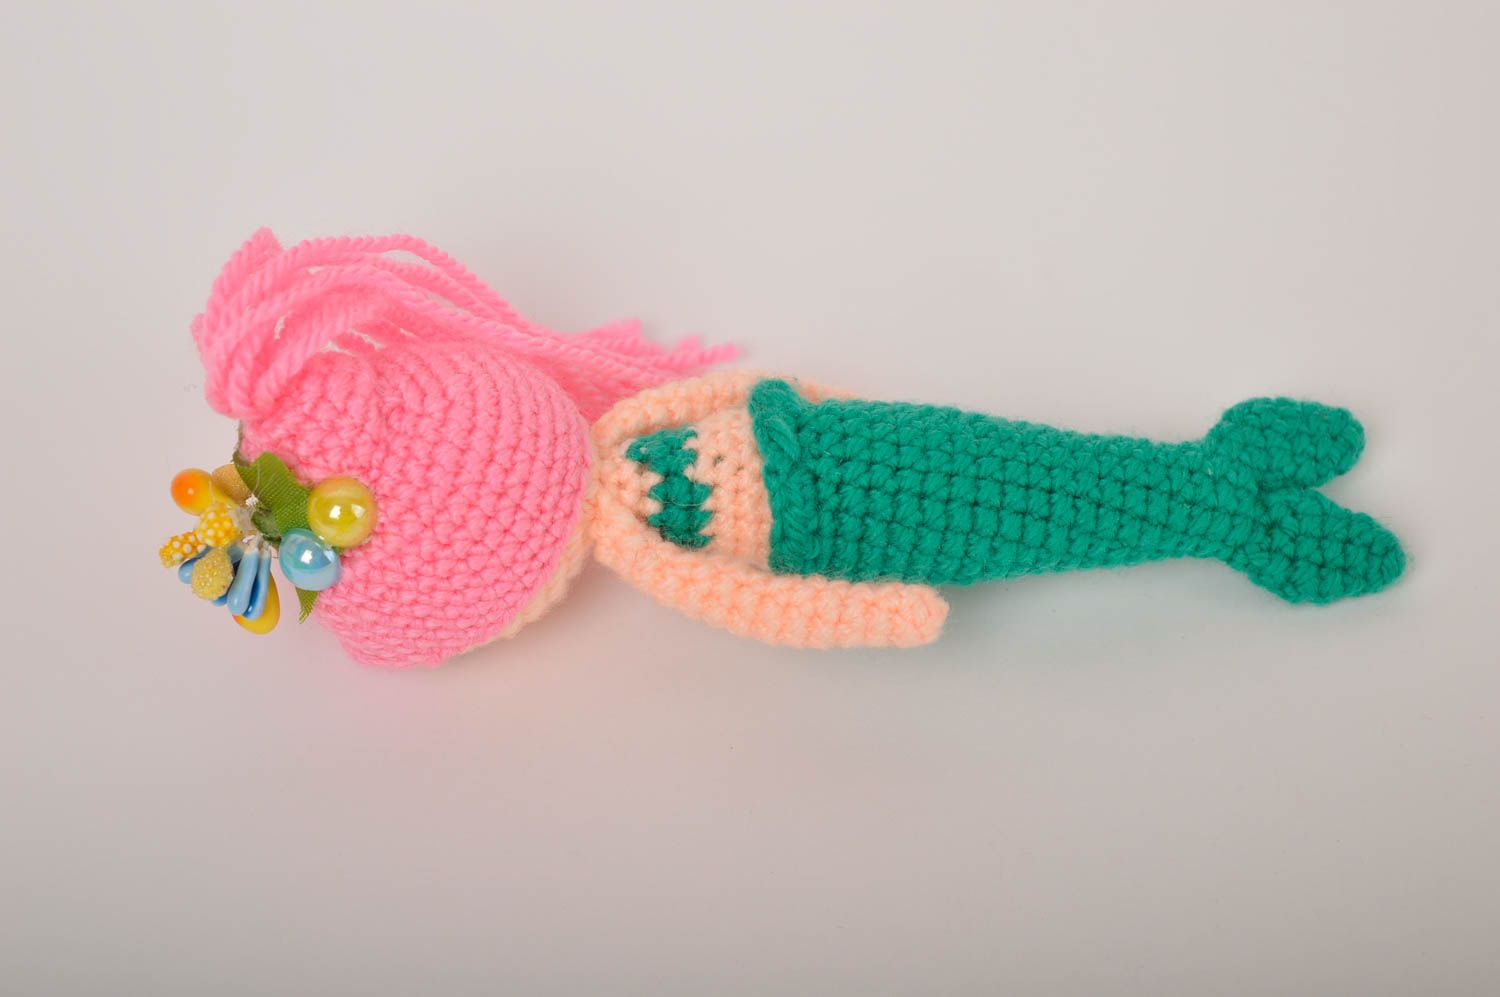 Little mermaid stuffed knitted toy in pink and green colors. 7 inches tall photo 4